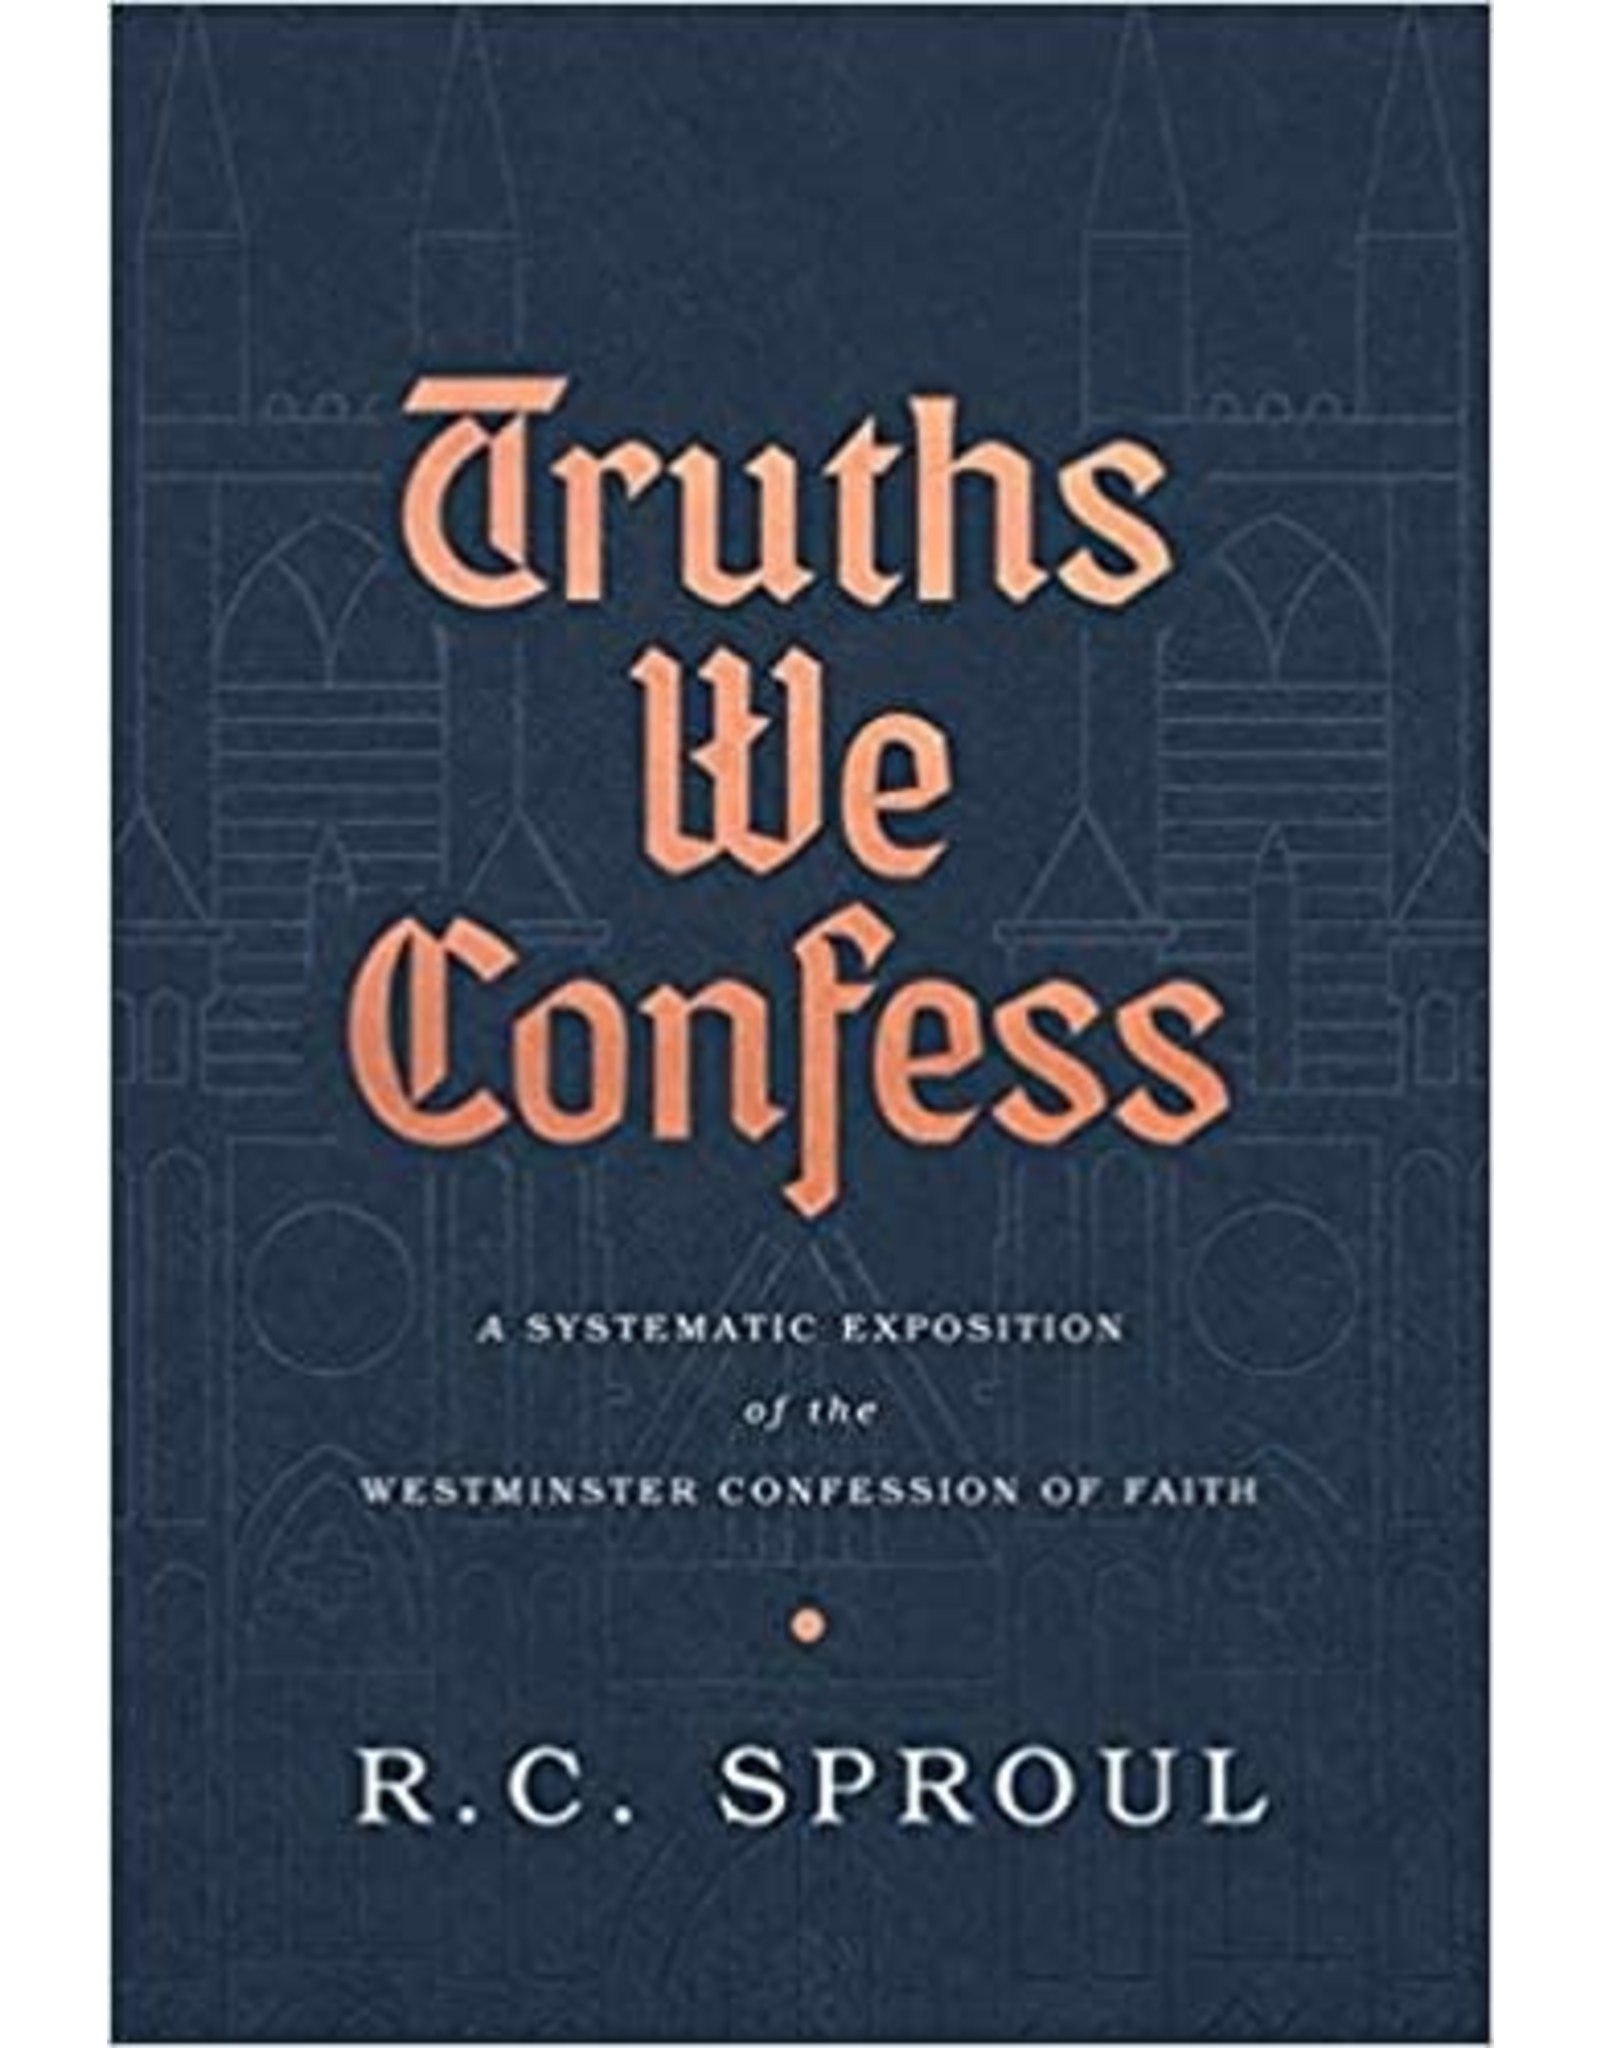 R C Sproul Truths We Confess:-Systematic Exposition of Westminster Confession